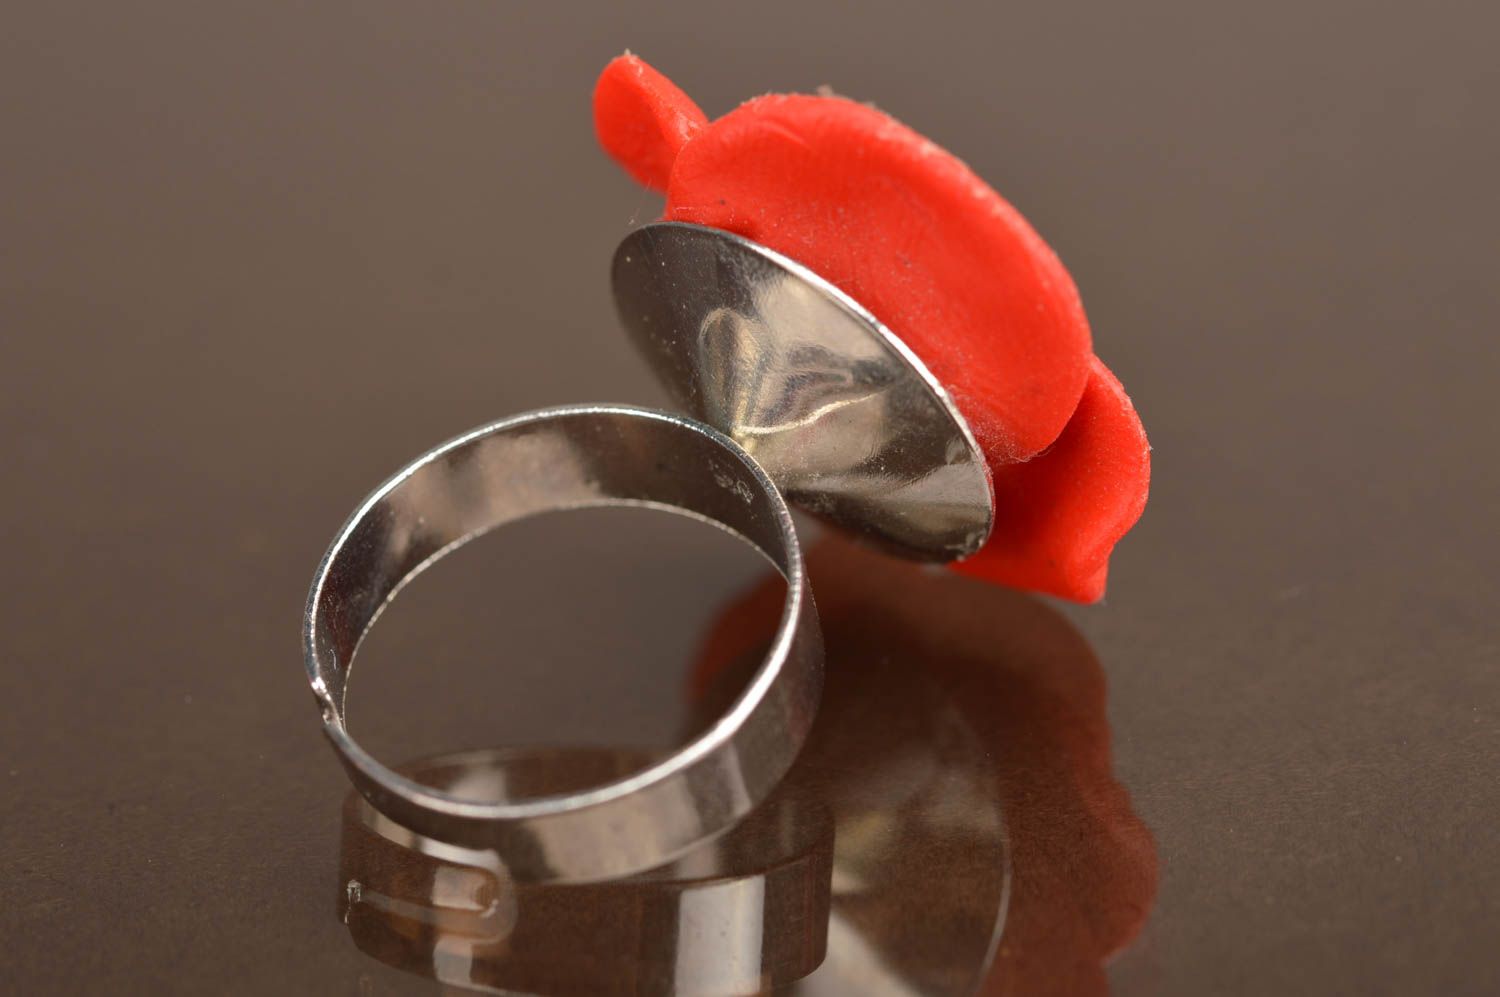 Handmade extravagant metal-based ring made of polymer clay in form of red poppy photo 2